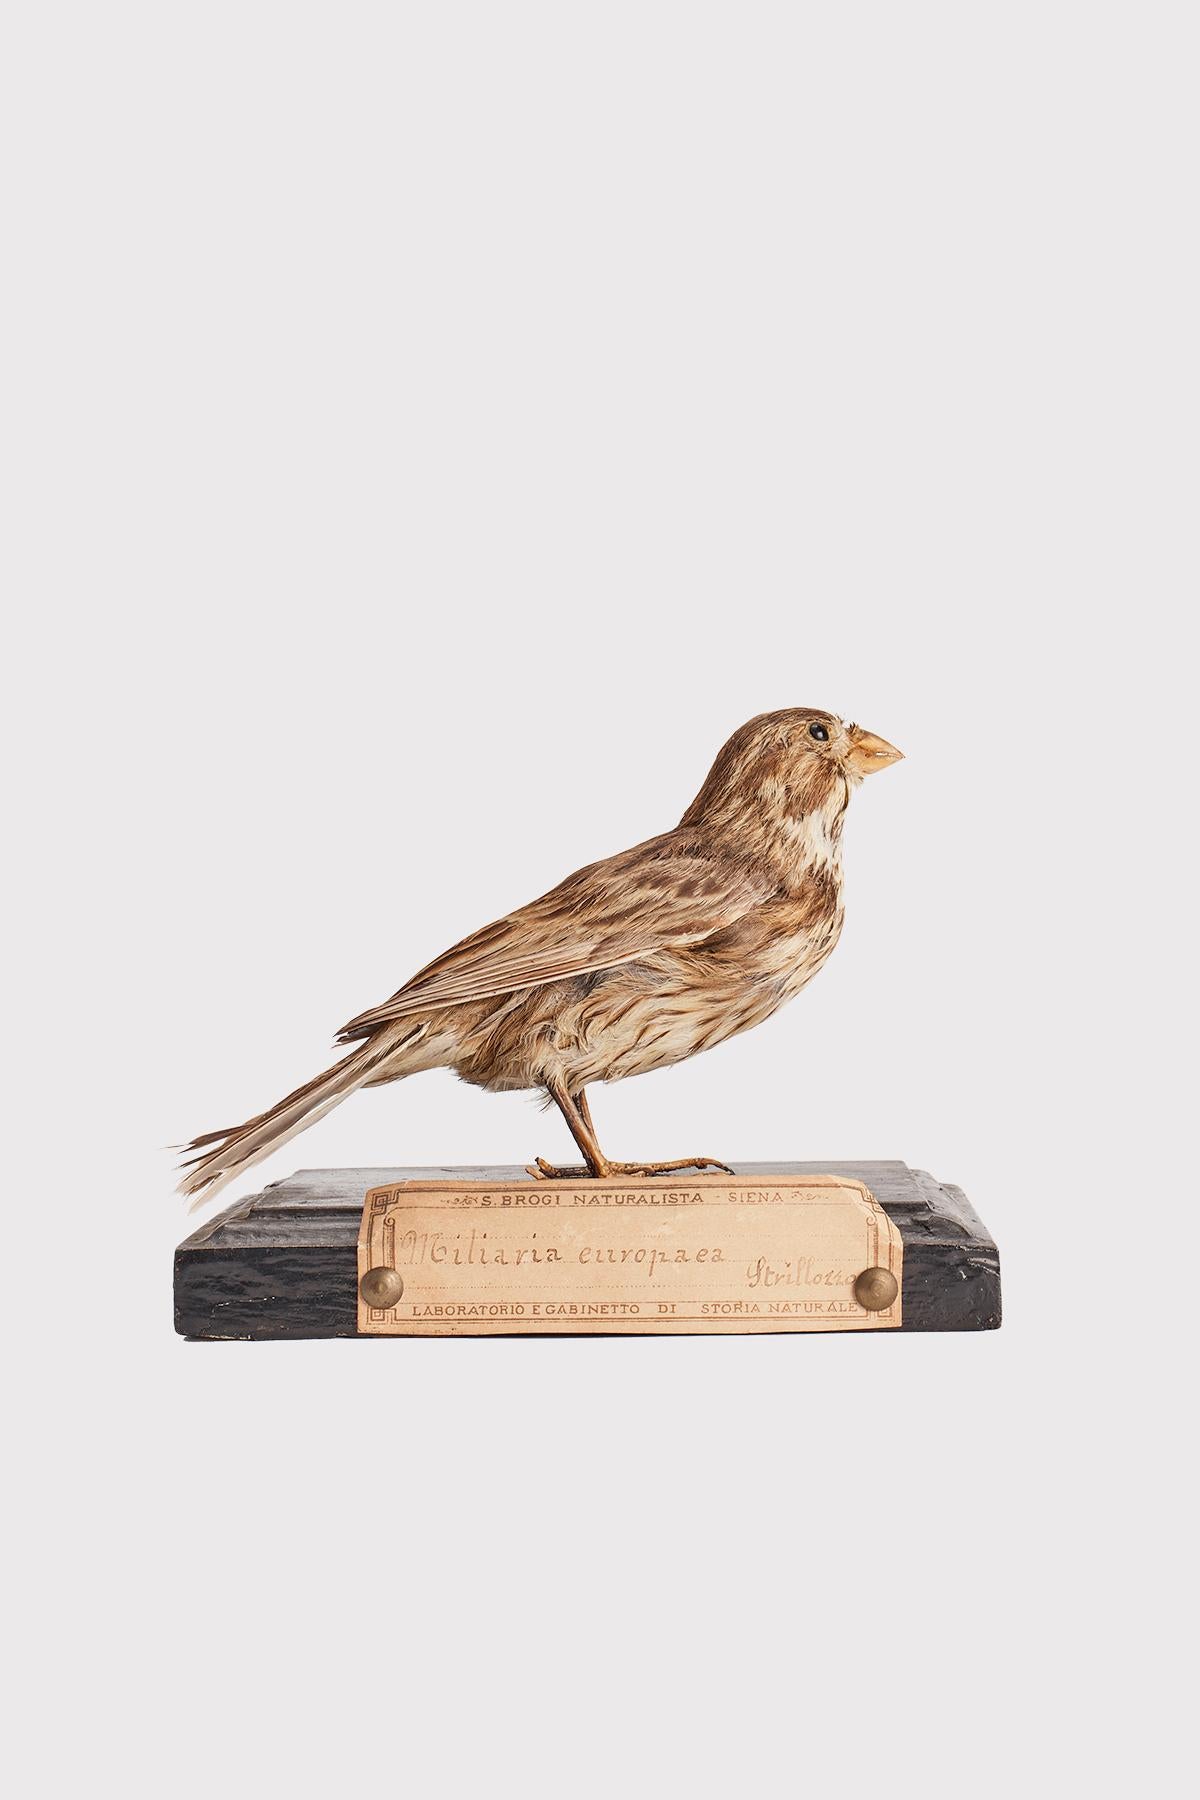 Natural specimen from Wunderkammer Stuffed bird (Emberiza calandra) Bunting mounted on a wooden base with cartouche Specimen for laboratory and Natural history cabinet. S. Brogi Naturalista. Siena, Italy 1880 ca.